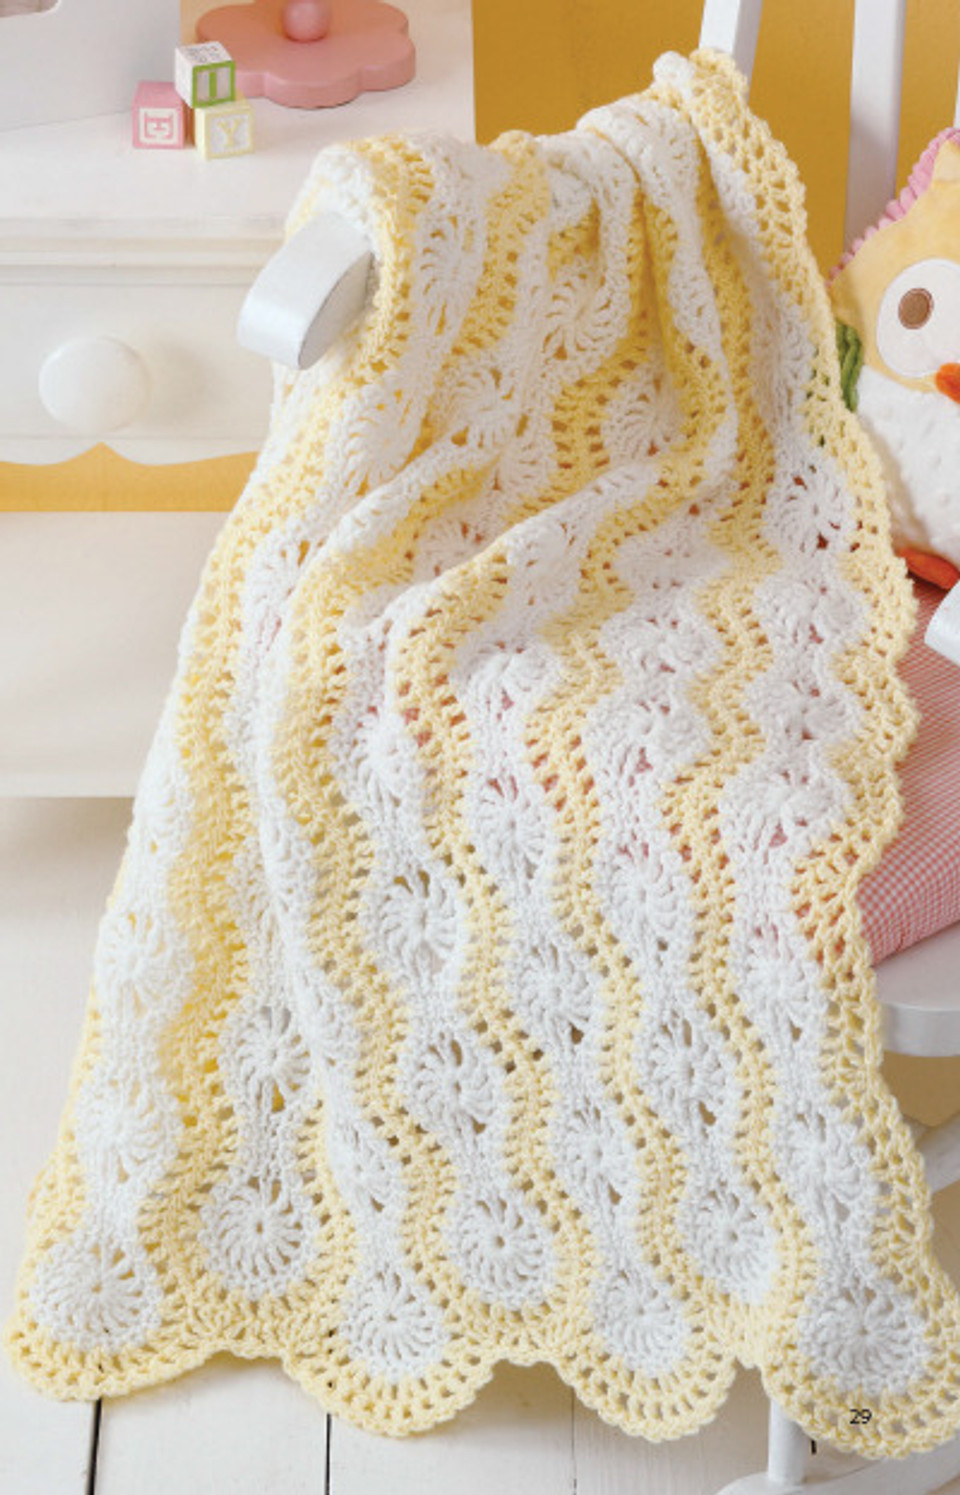 Learn To Make Mile-A-Minute Baby Afghans Crochet Book